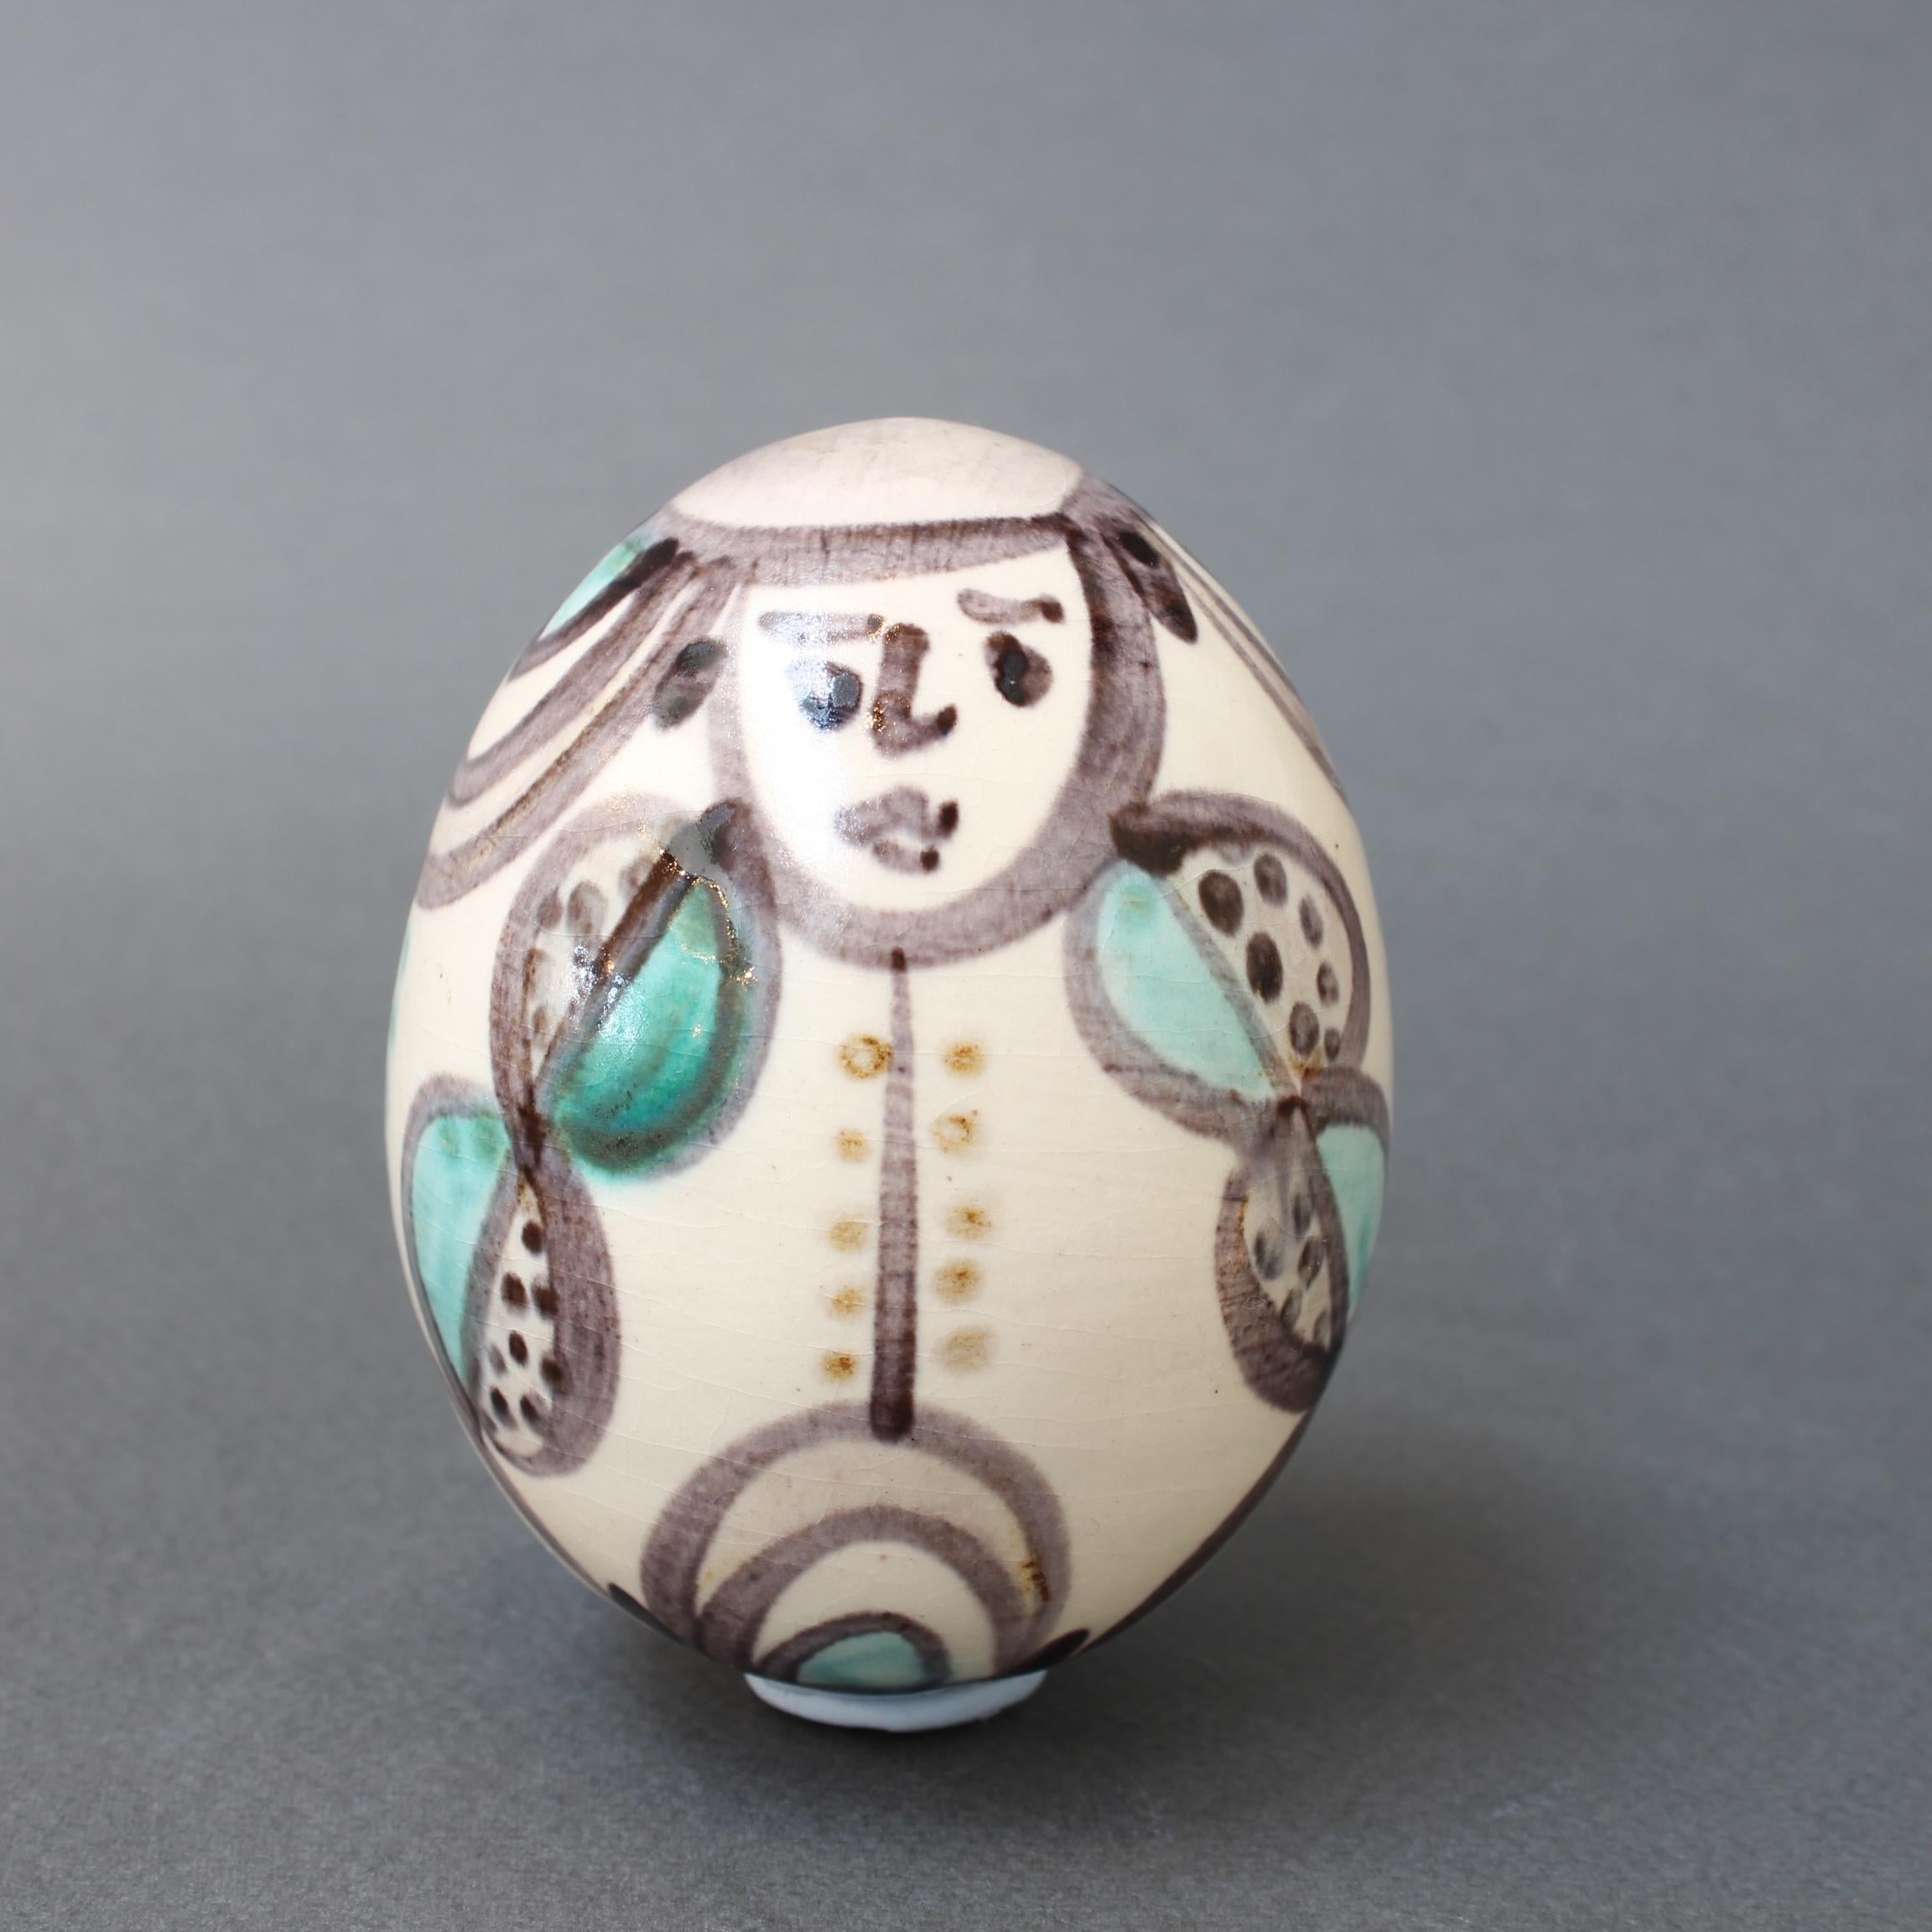 Vintage ceramic egg figure from Atelier Madoura, Vallauris, France (circa 1960s). This egg-sized ceramic figure is painted with a stylized suited man with a smile on his face. It is a simply but elegantly painted work with many charms and would